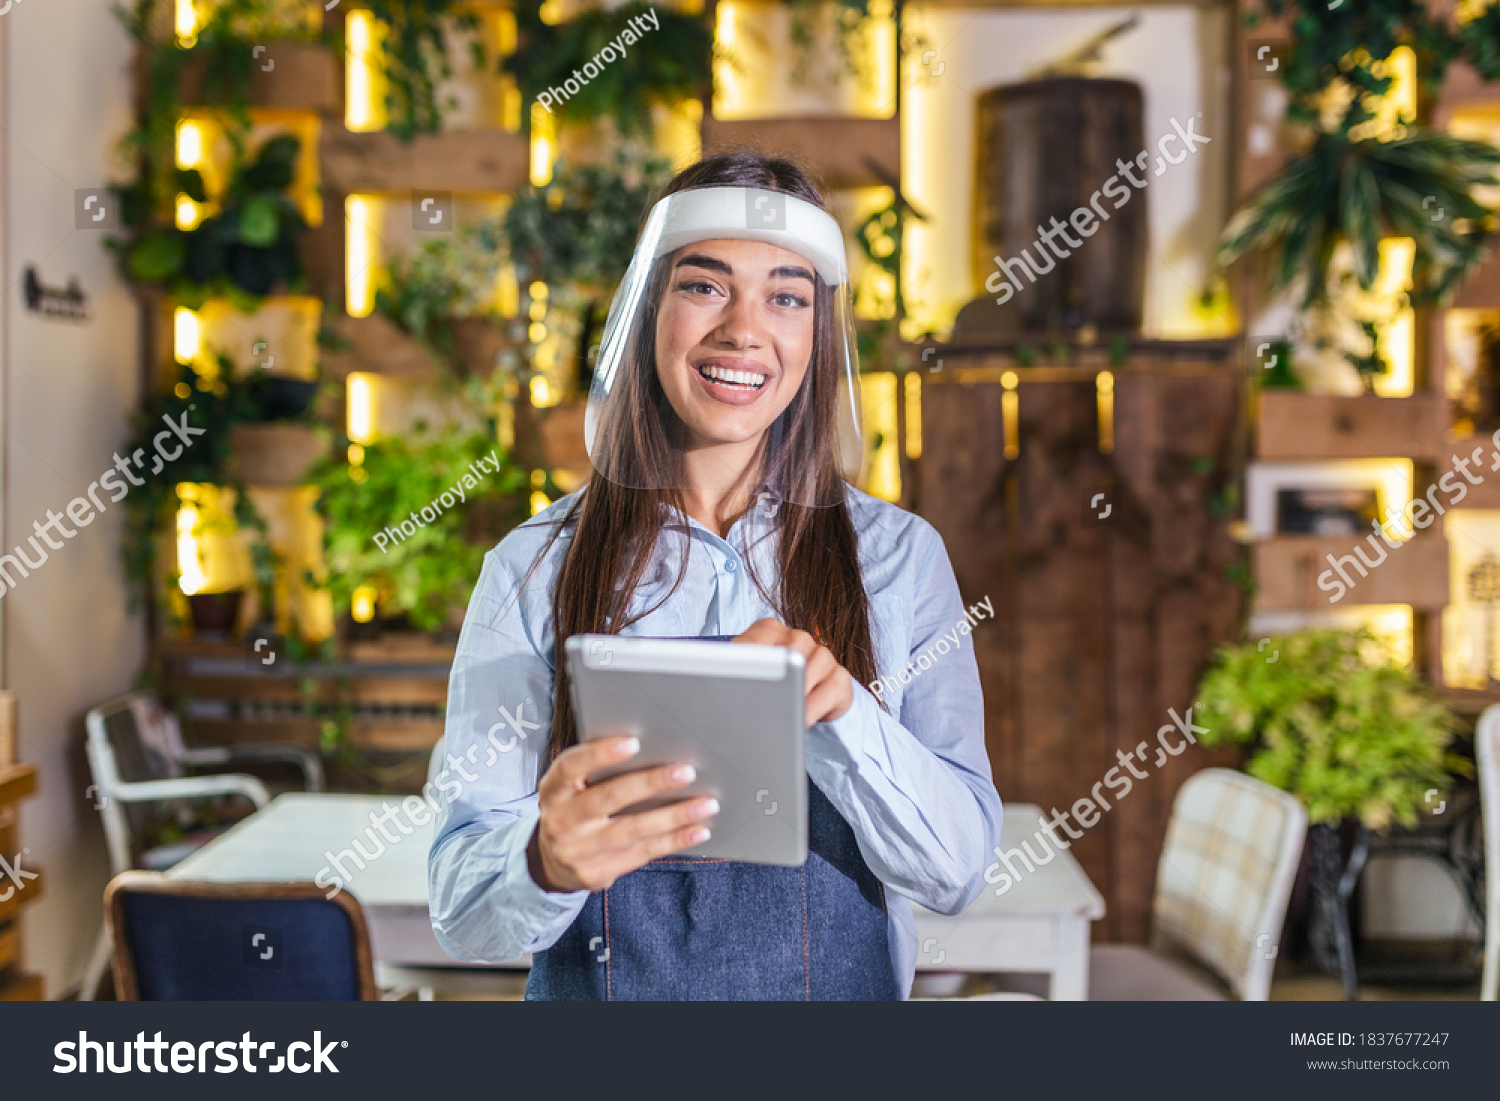 Happy female waitress using digital tablet while wearing visor at the restaurant or cafe. Open again after lock down due to outbreak of coronavirus covid-19, New normal #1837677247